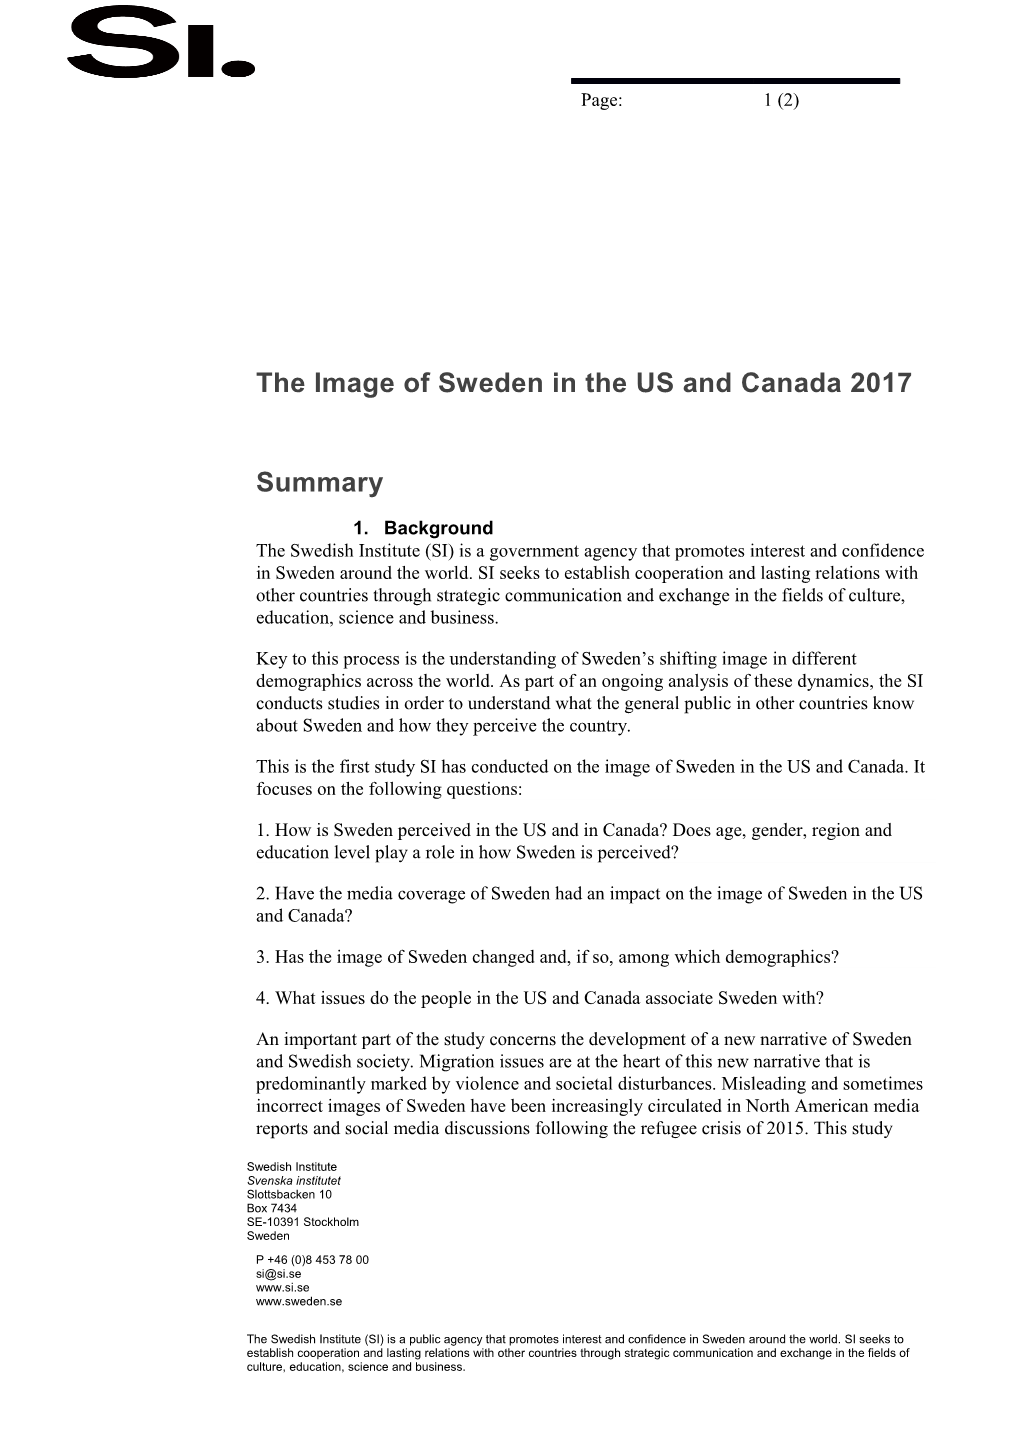 The Image of Sweden in the US and Canada 2017